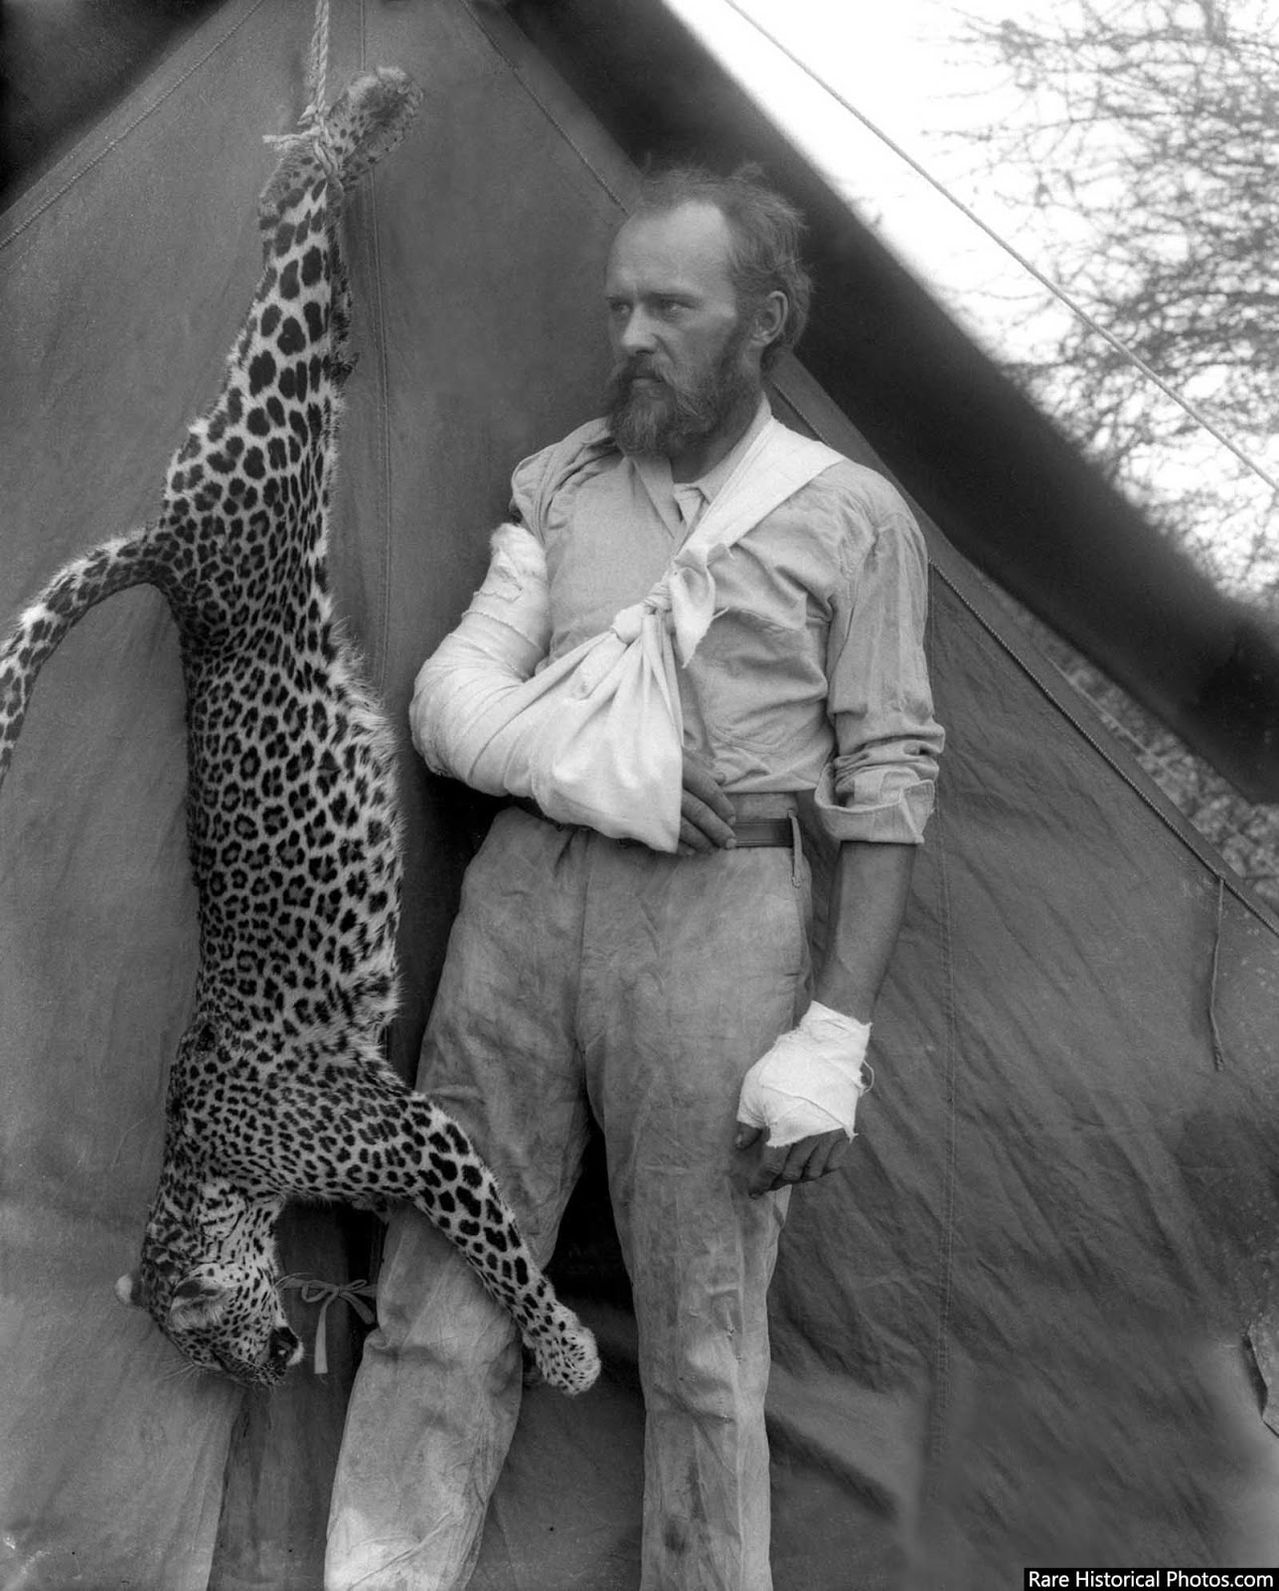 Taxidermist Carl Akeley posing with the leopard he killed with his bare hands after it attacked him, 1896.

Not wanting to end up stuffing the cat with his own entrails, Akeley raised his rifle and fired twice, but he missed both times. On his third shot, the bullet grazed the leopard, sending the feline into a frenzy. Enranged, the big cat screamed and charged the American, all teeth and bad attitude, ready to take his revenge.
Terrified out of his mind, Akeley pulled the trigger a fourth time, only to realize that he was out of bullets. Downright desperate, Akeley tried to flee, loading cartridges into his rifle as he ran. Working the bolt, he turned to shoot, only to see the leopard flying through the air, fangs bared. Fortunately, Akeley’s first shot had wounded one of the cat’s back paws. Thanks to the bullet, the leopard’s jump was a bit off, giving Akeley enough time to throw up his hands. The cat sank its jaws into the man’s forearm, and the two started wrestling back and forth, fighting for their lives. Eventually, the man and cat grew weak and tumbled to the ground. Finally, he managed to strangle the leopard with his left hand while ramming his right arm down the leopard’s throat.